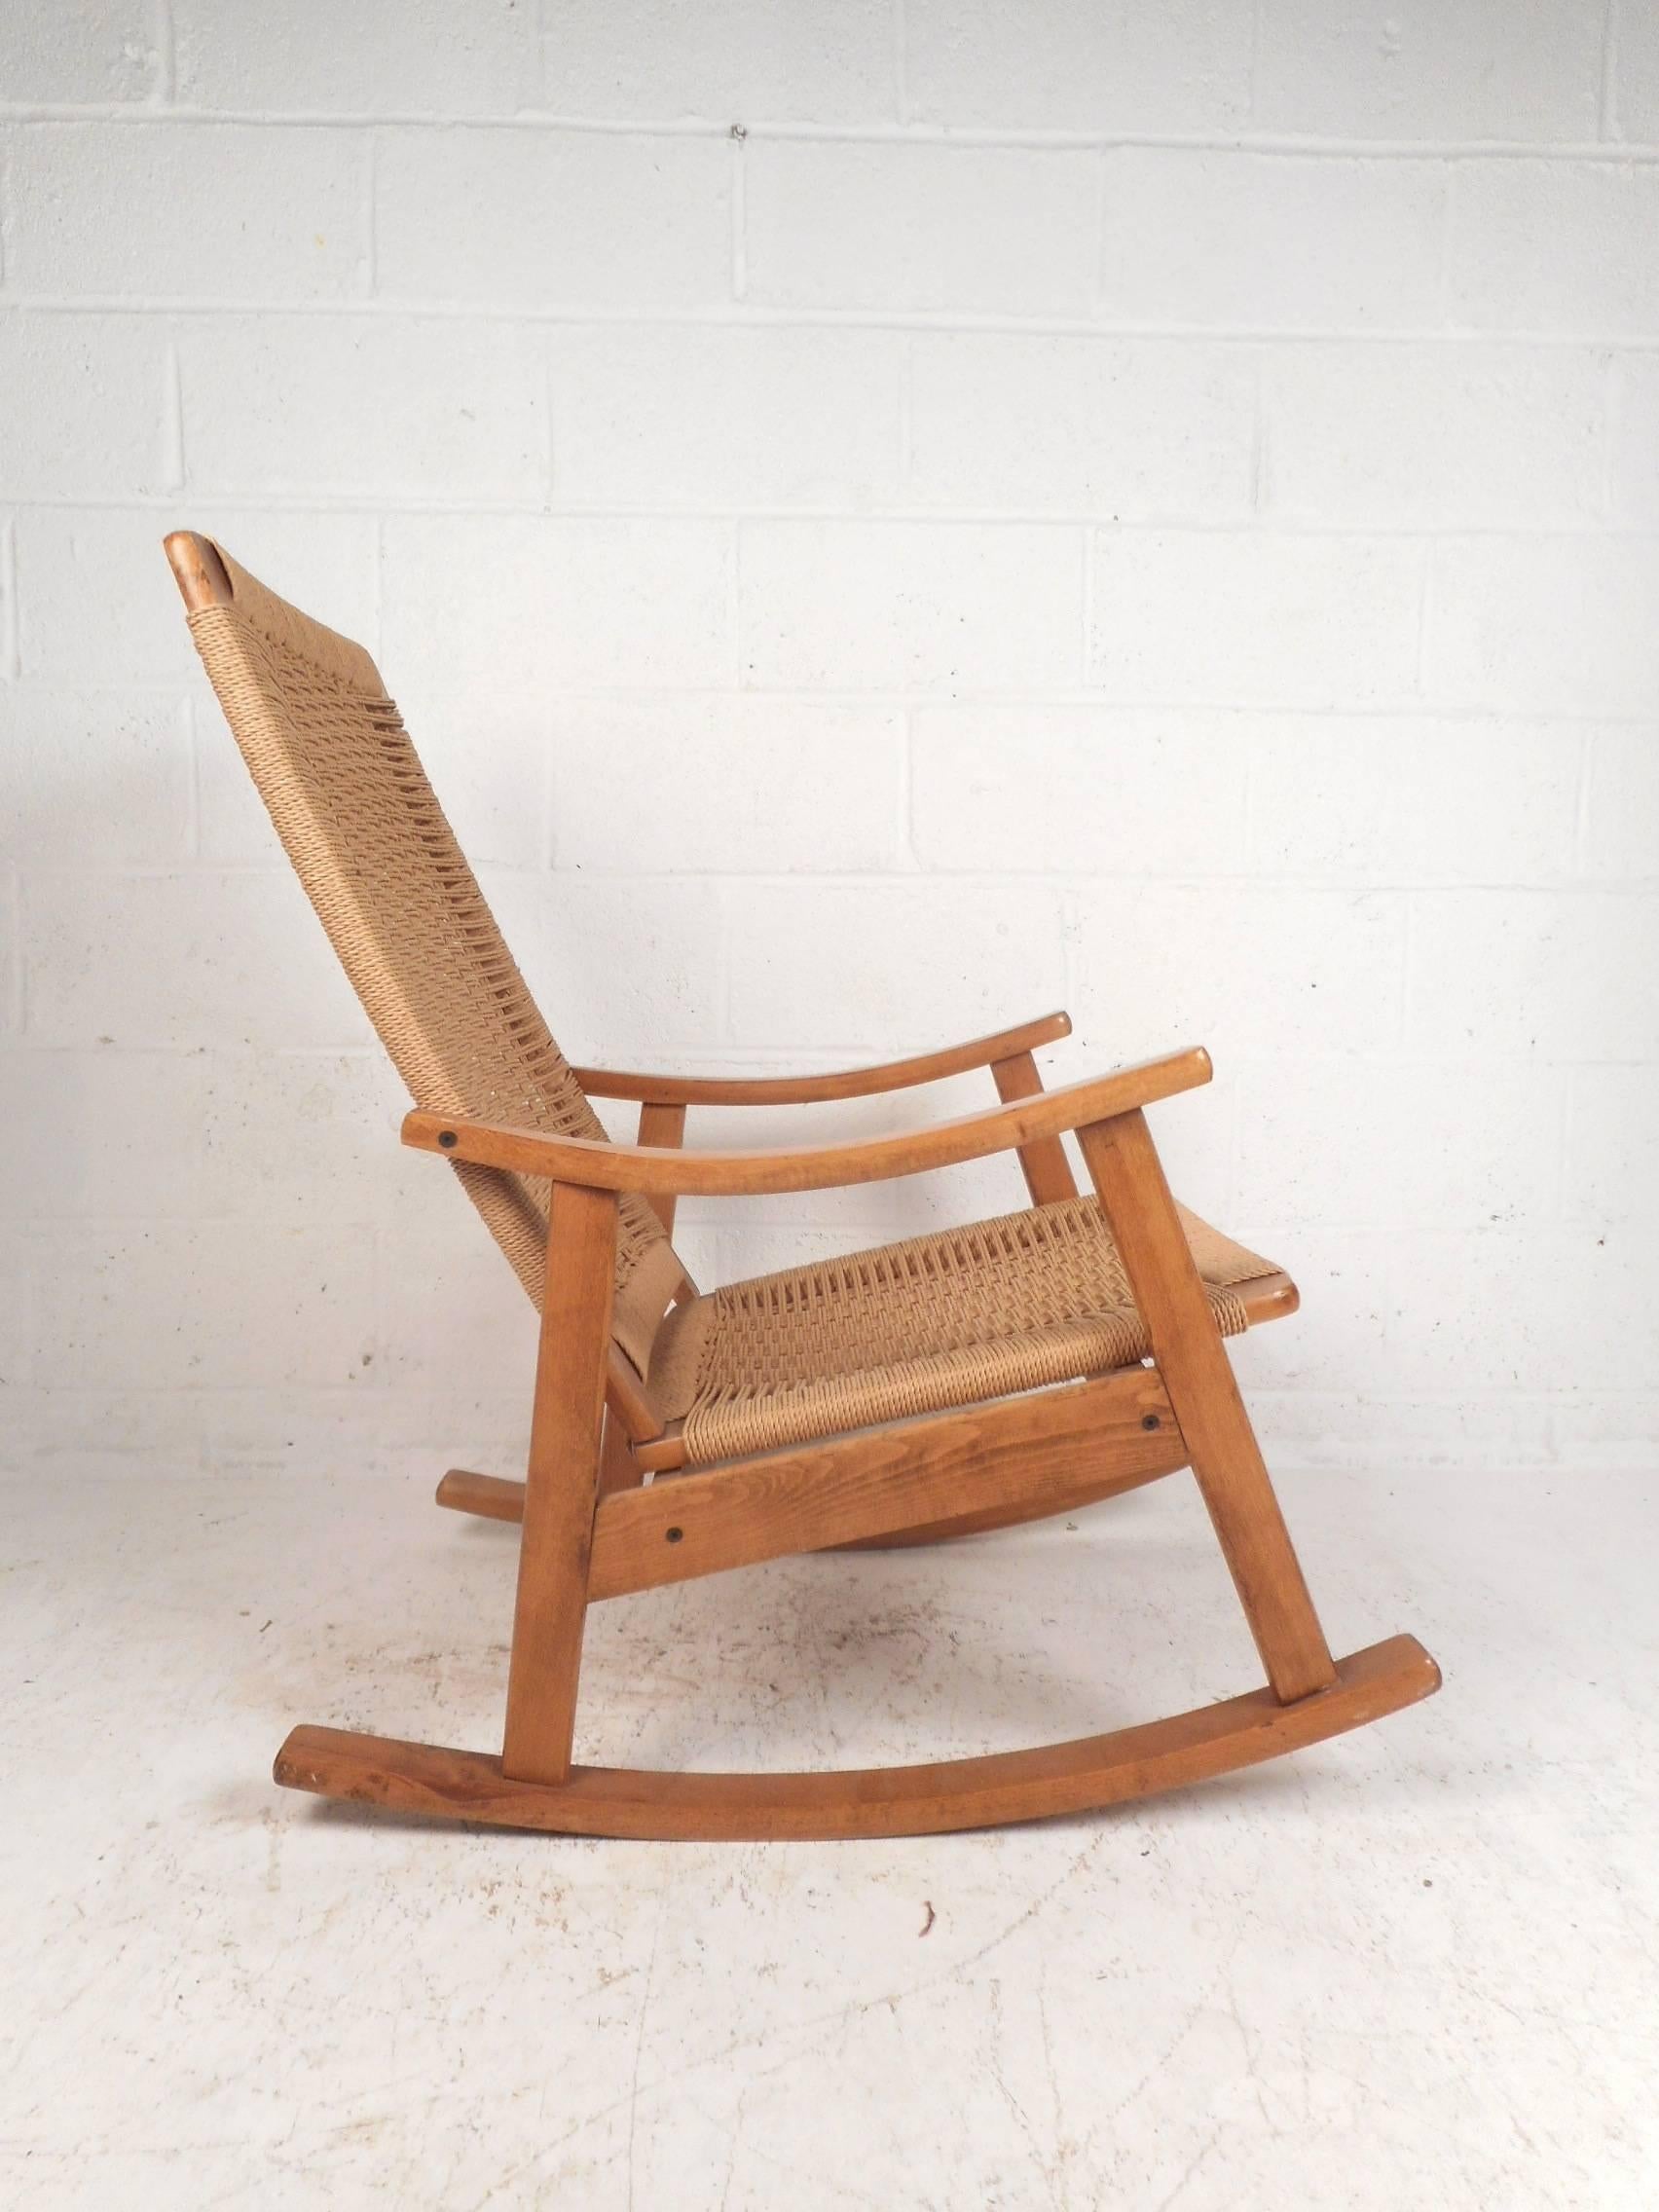 A gorgeous vintage modern rocking chair in the style of Hans Wegner. This stunning chair has a woven jute rope seat and back rest. An extremely comfortable and sturdy midcentury piece. The midcentury lines and blonde wood frame are sure to make an